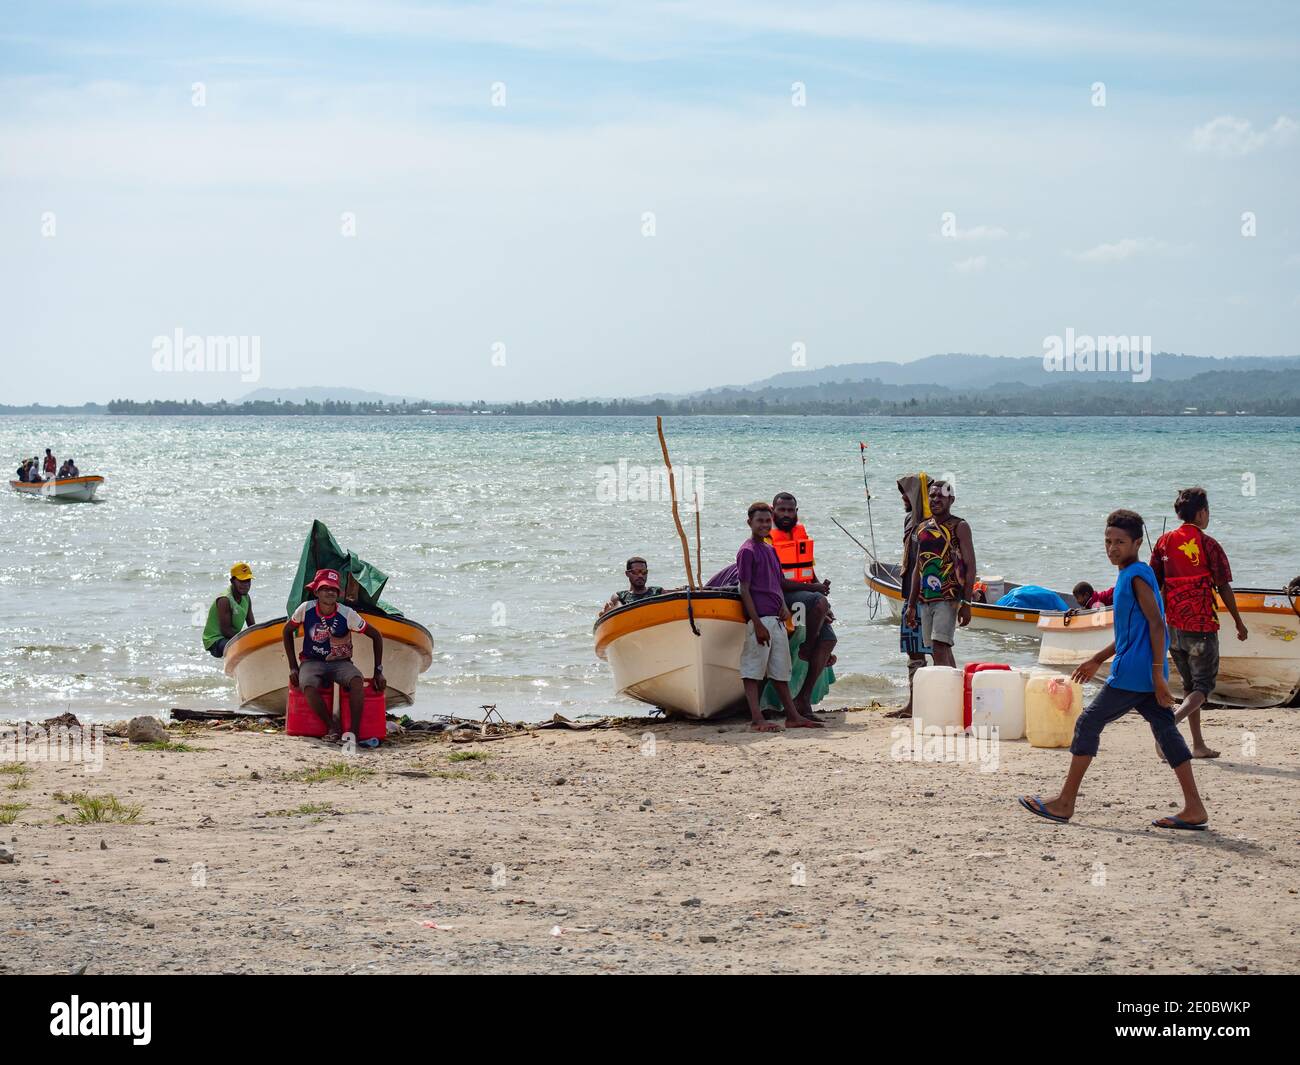 Passenger ferries at Wewak, the capital of the East Sepik province of Papua New Guinea. The dinghies are used for public transportation all along the Stock Photo